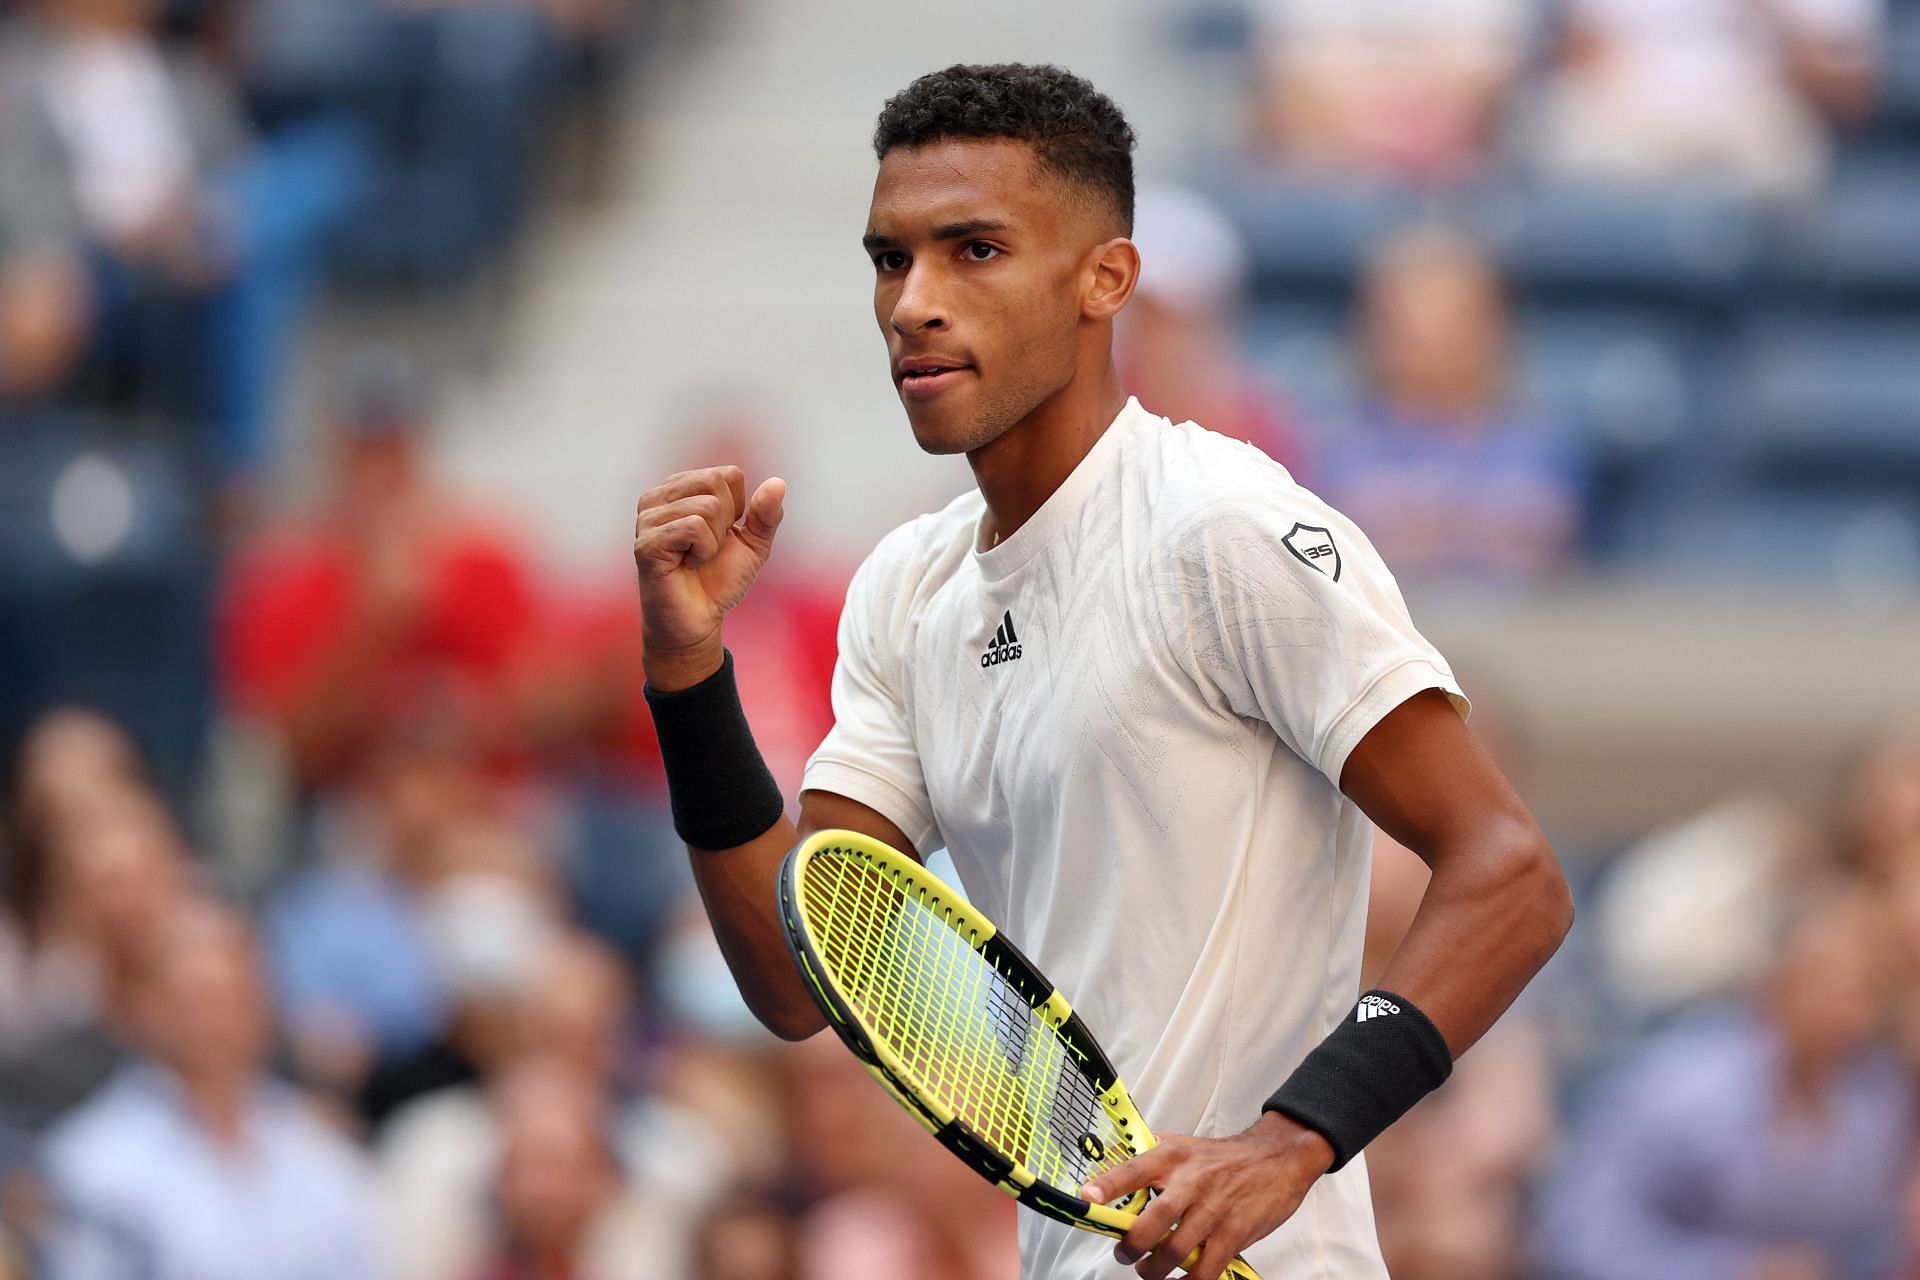 Felix Auger-Aliassime in action at the 2021 US Open